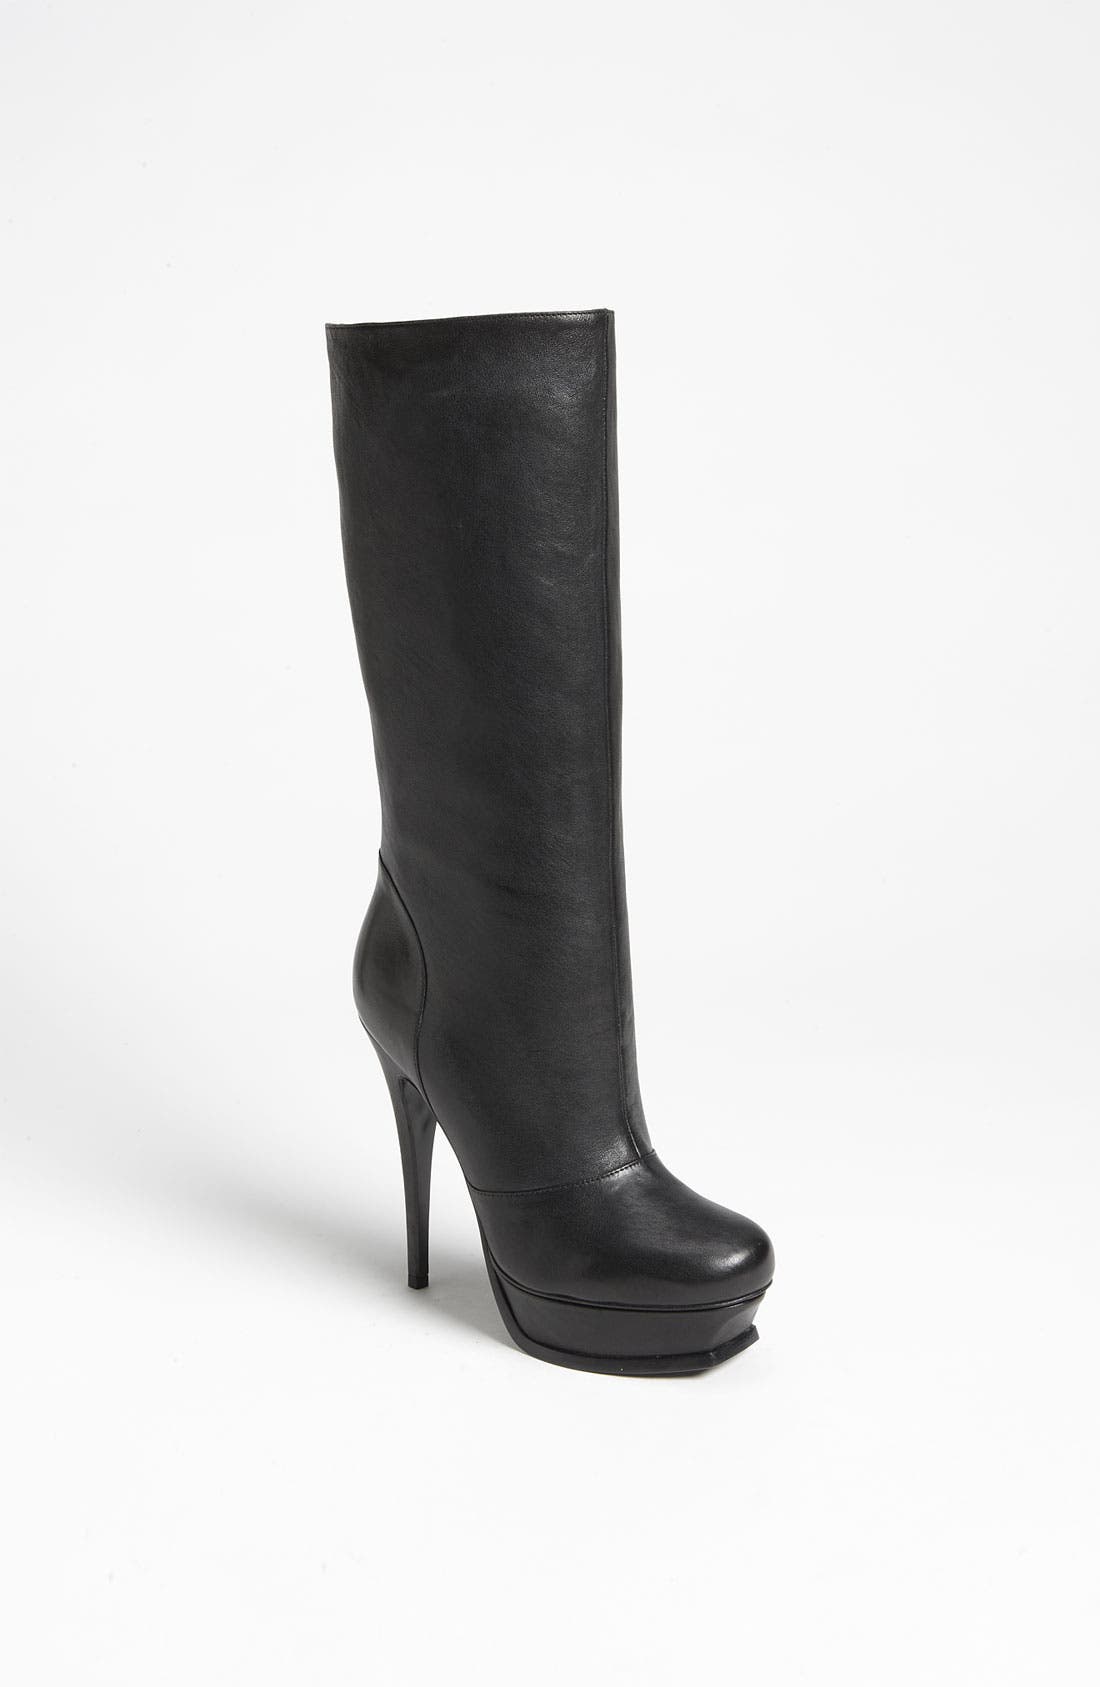 ysl boots nordstrom